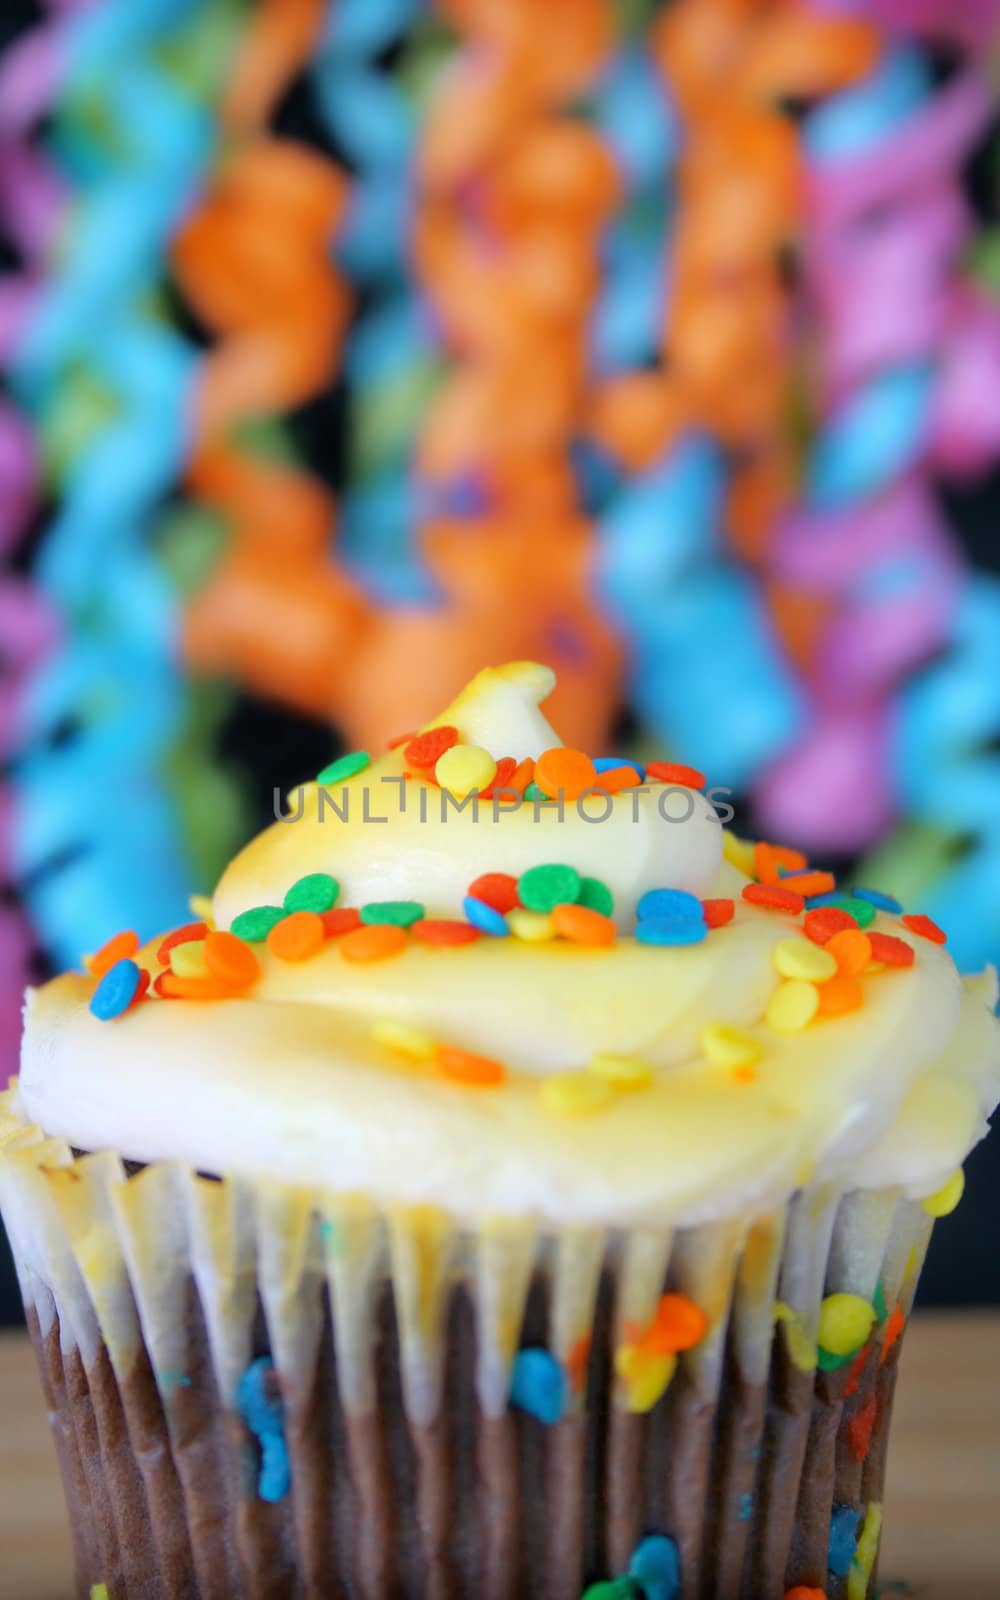 One cupcake with sprinkles and ribbons hanging in the background.  Used a shallow depth of field and selective focus on the middle part of cupcake and sprinkles.